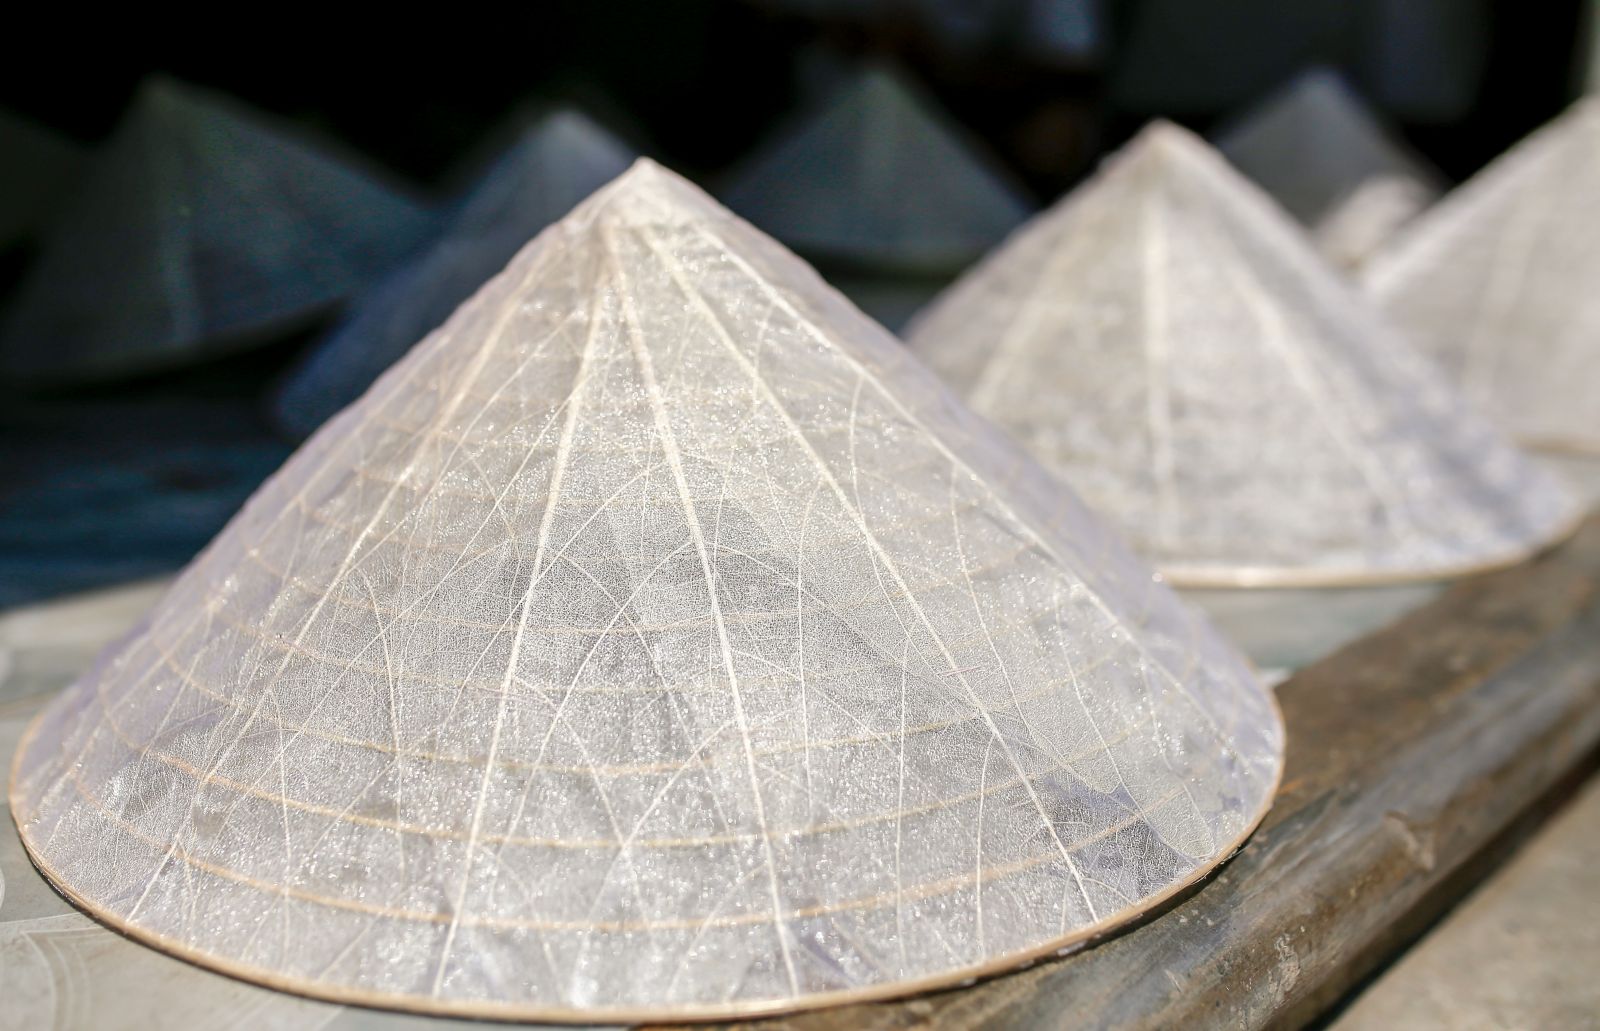 The transparent leaf veins conical hats are finished, with their strange beauty of elegance and luxury.